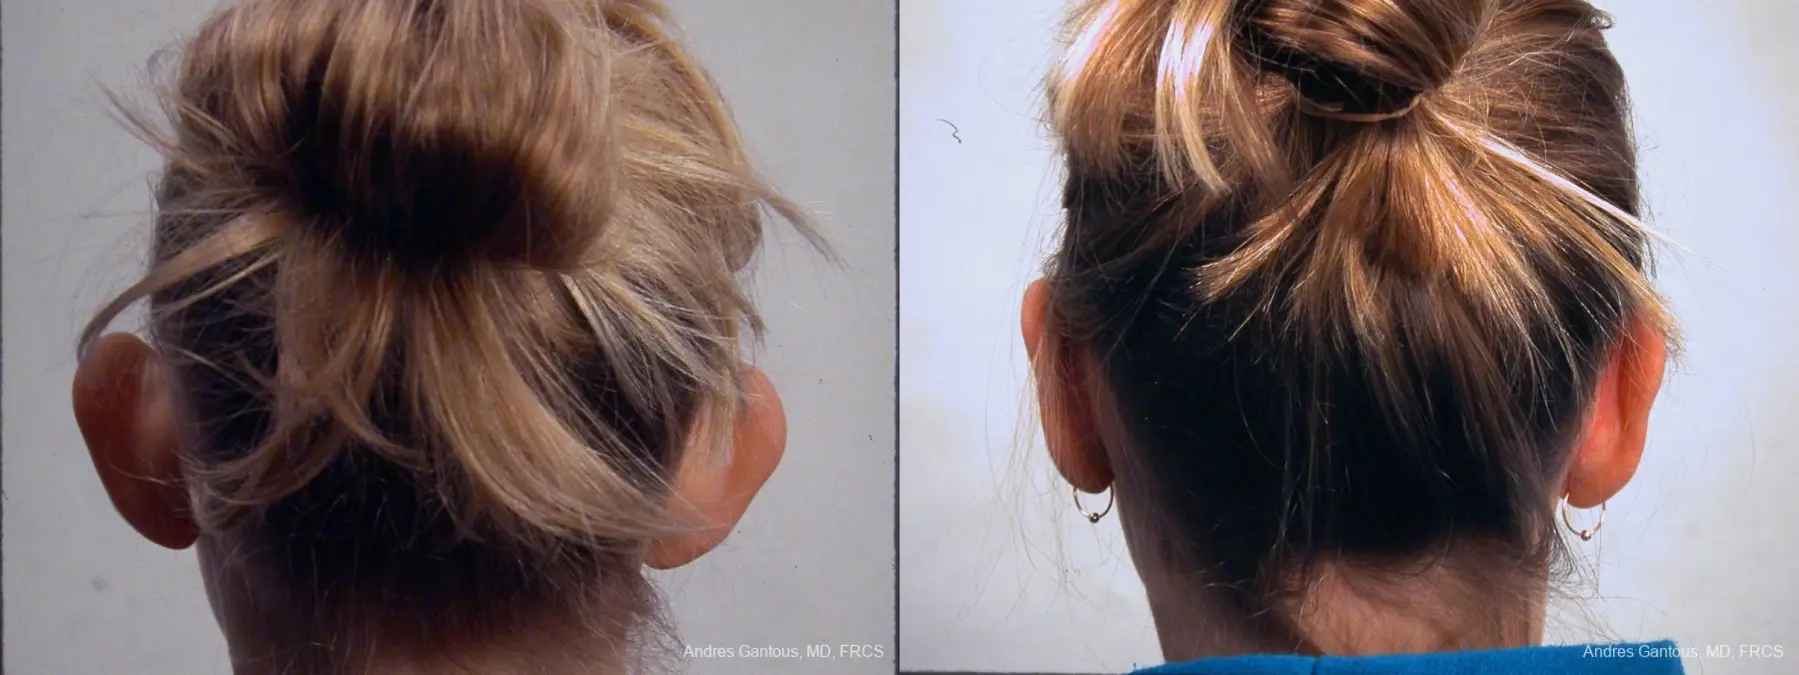 Otoplasty And Earlobe Repair: Patient 23 - Before and After 4